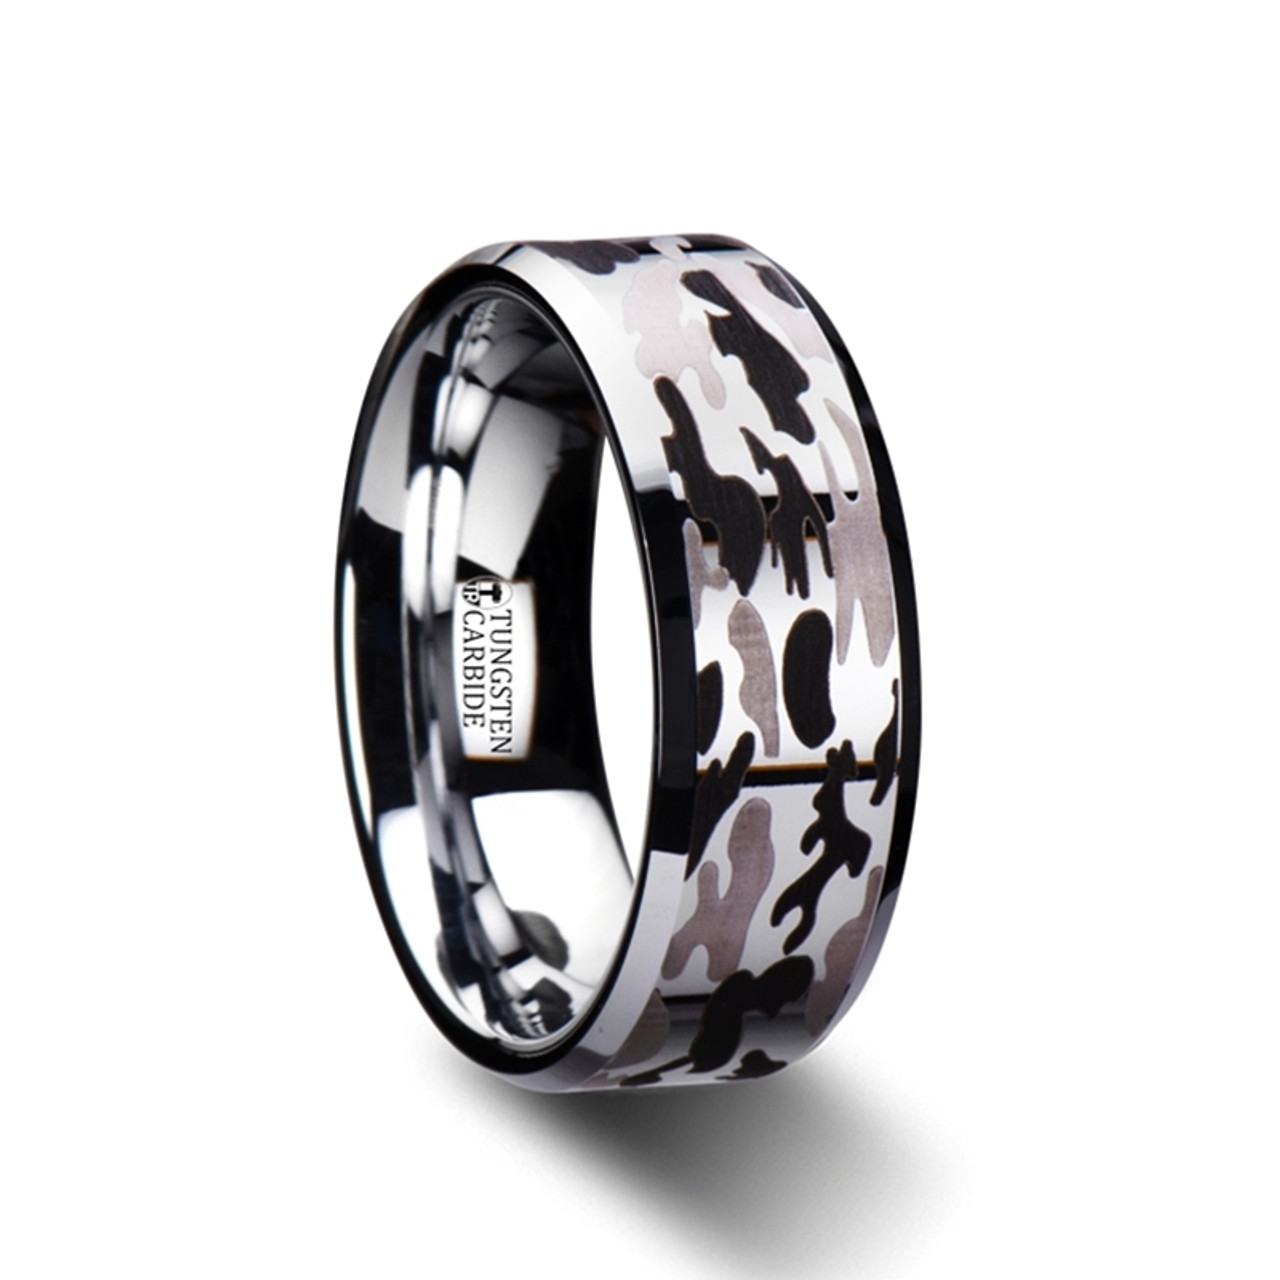 ARMISTICE Tungsten Carbide Black and Gray Camo Pattern Wedding Ring - Beveled Comfort Fit - 8mm